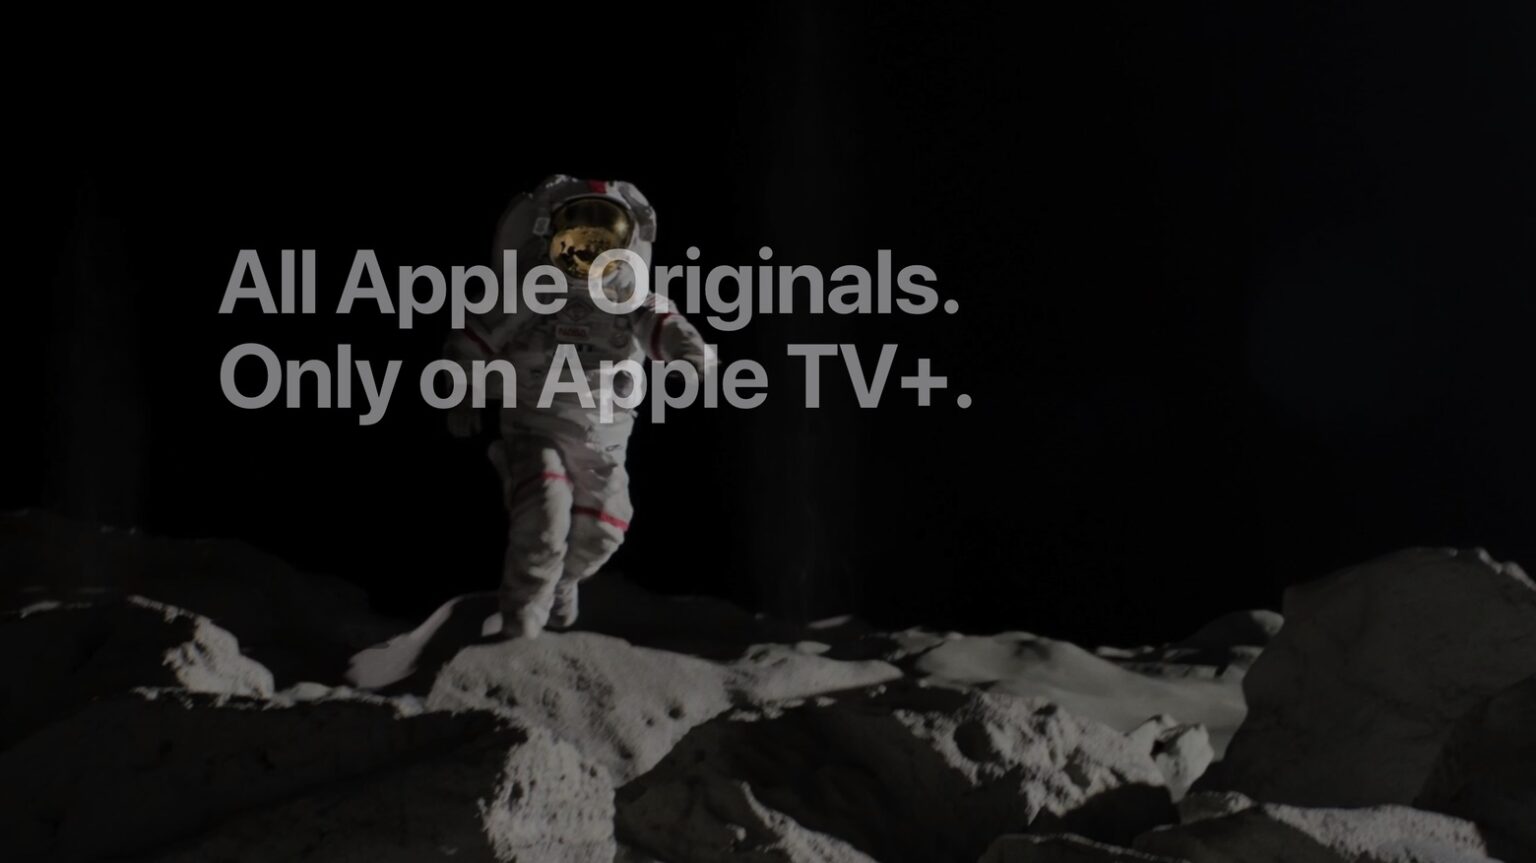 Apple TV+ might premiere new show or movie every week in 2022